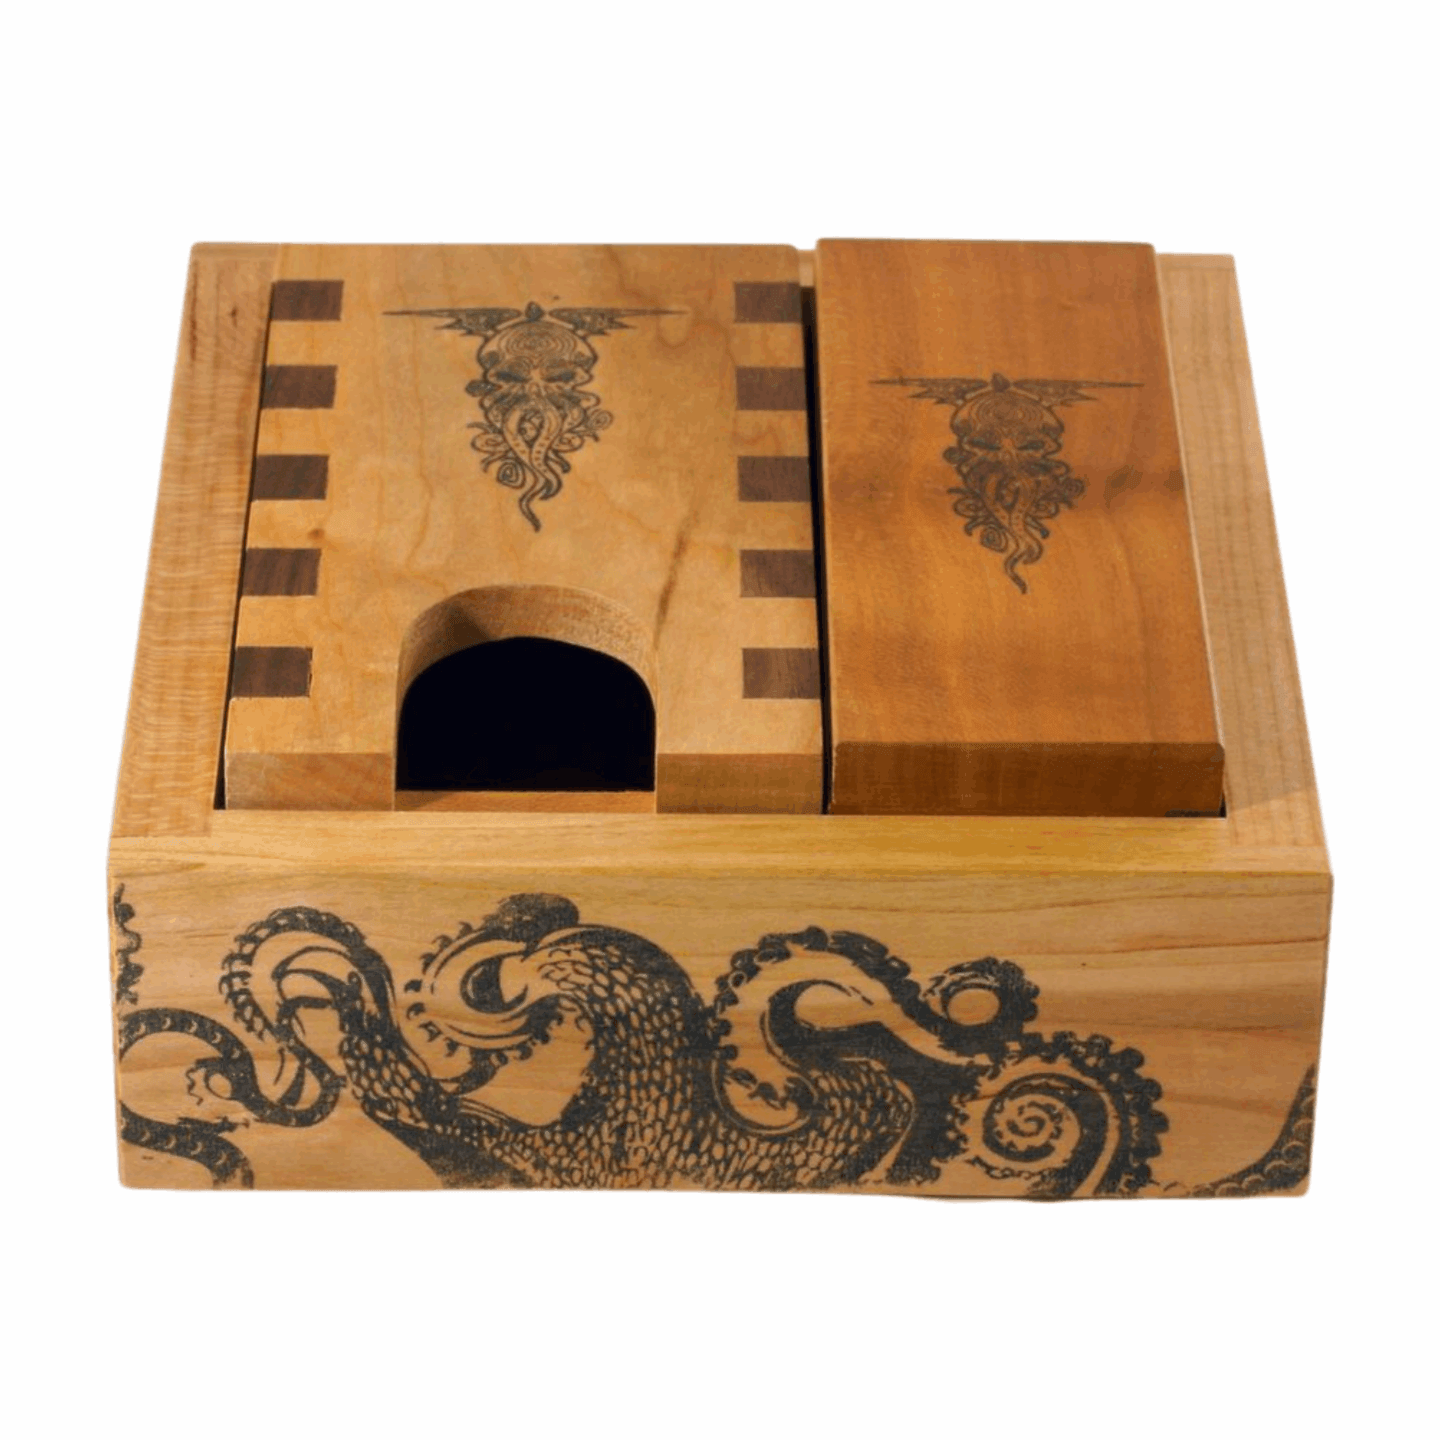 Cthulhu Box Joint Dice Tower and Dice Vault laying flat in tentacle dice tray